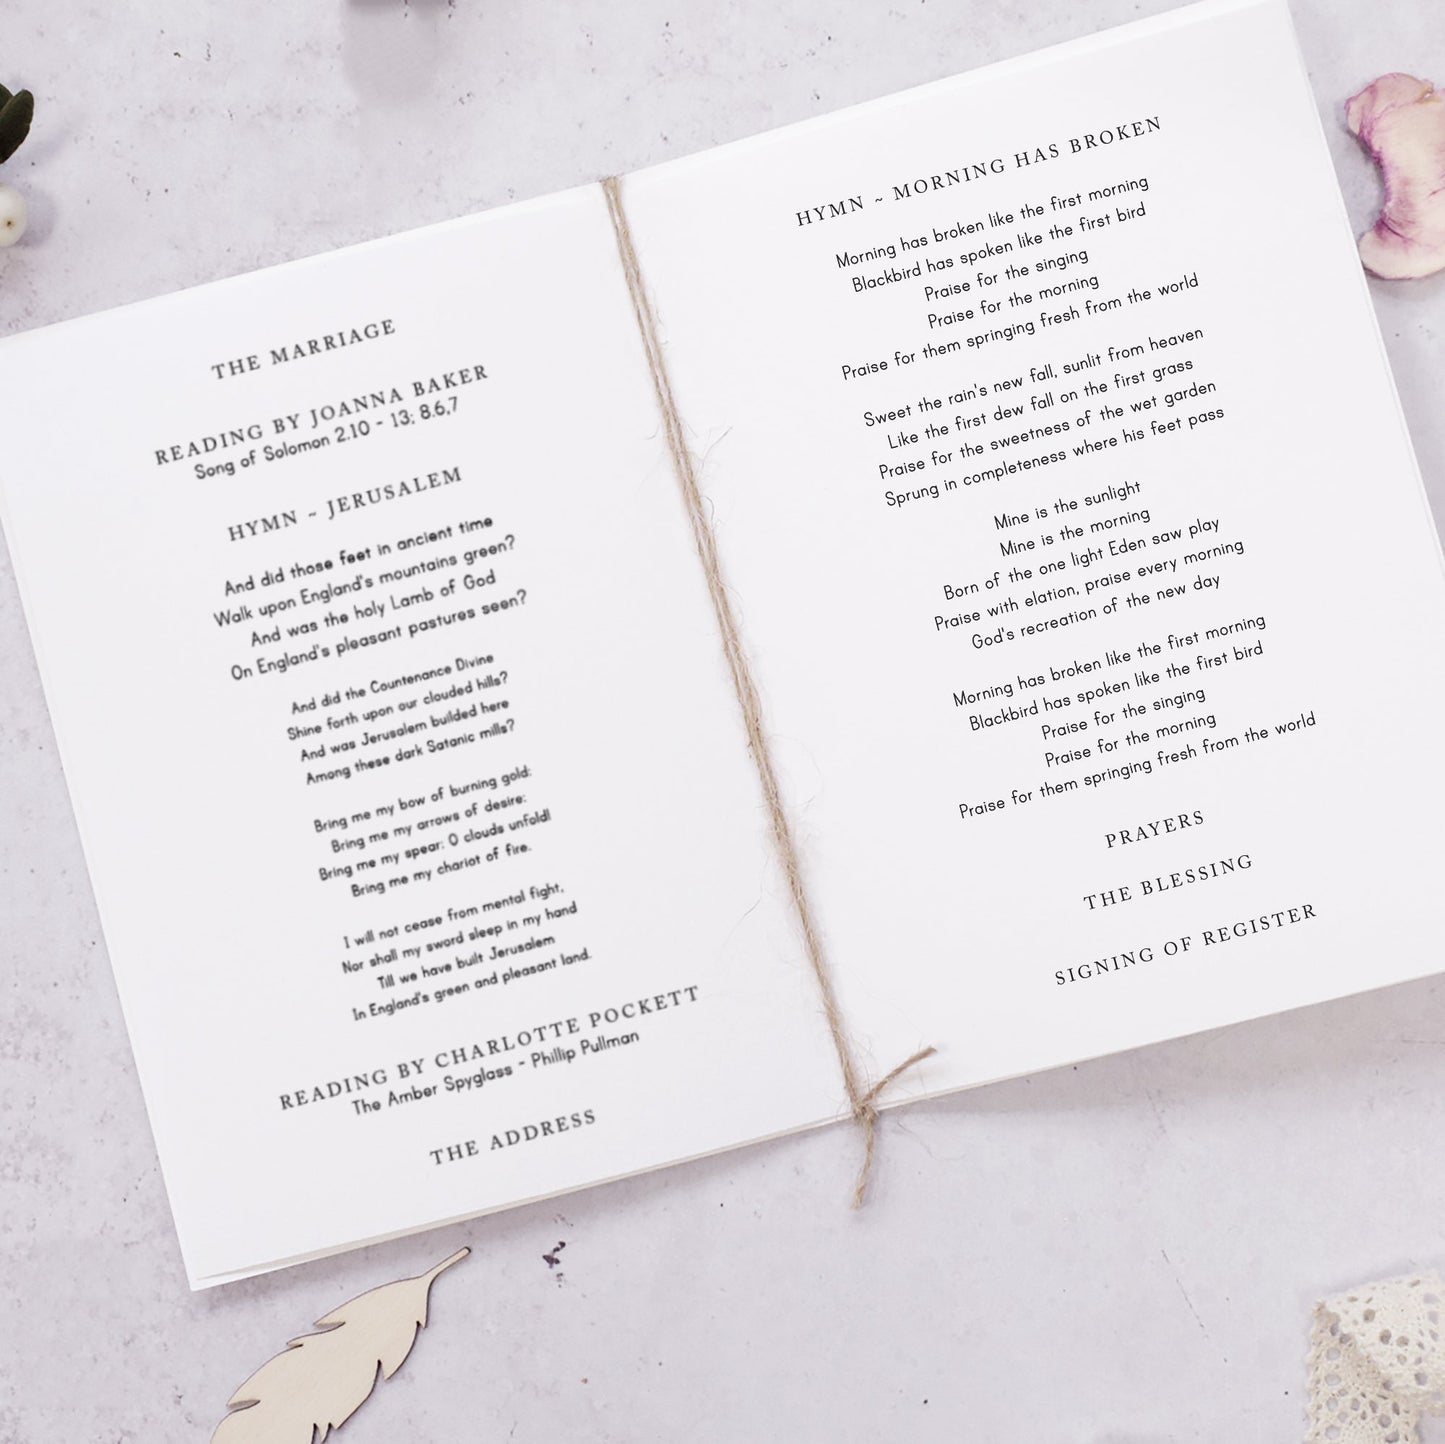 8 PAGE 'Whimsical Barn' Wedding Order of Service Booklet